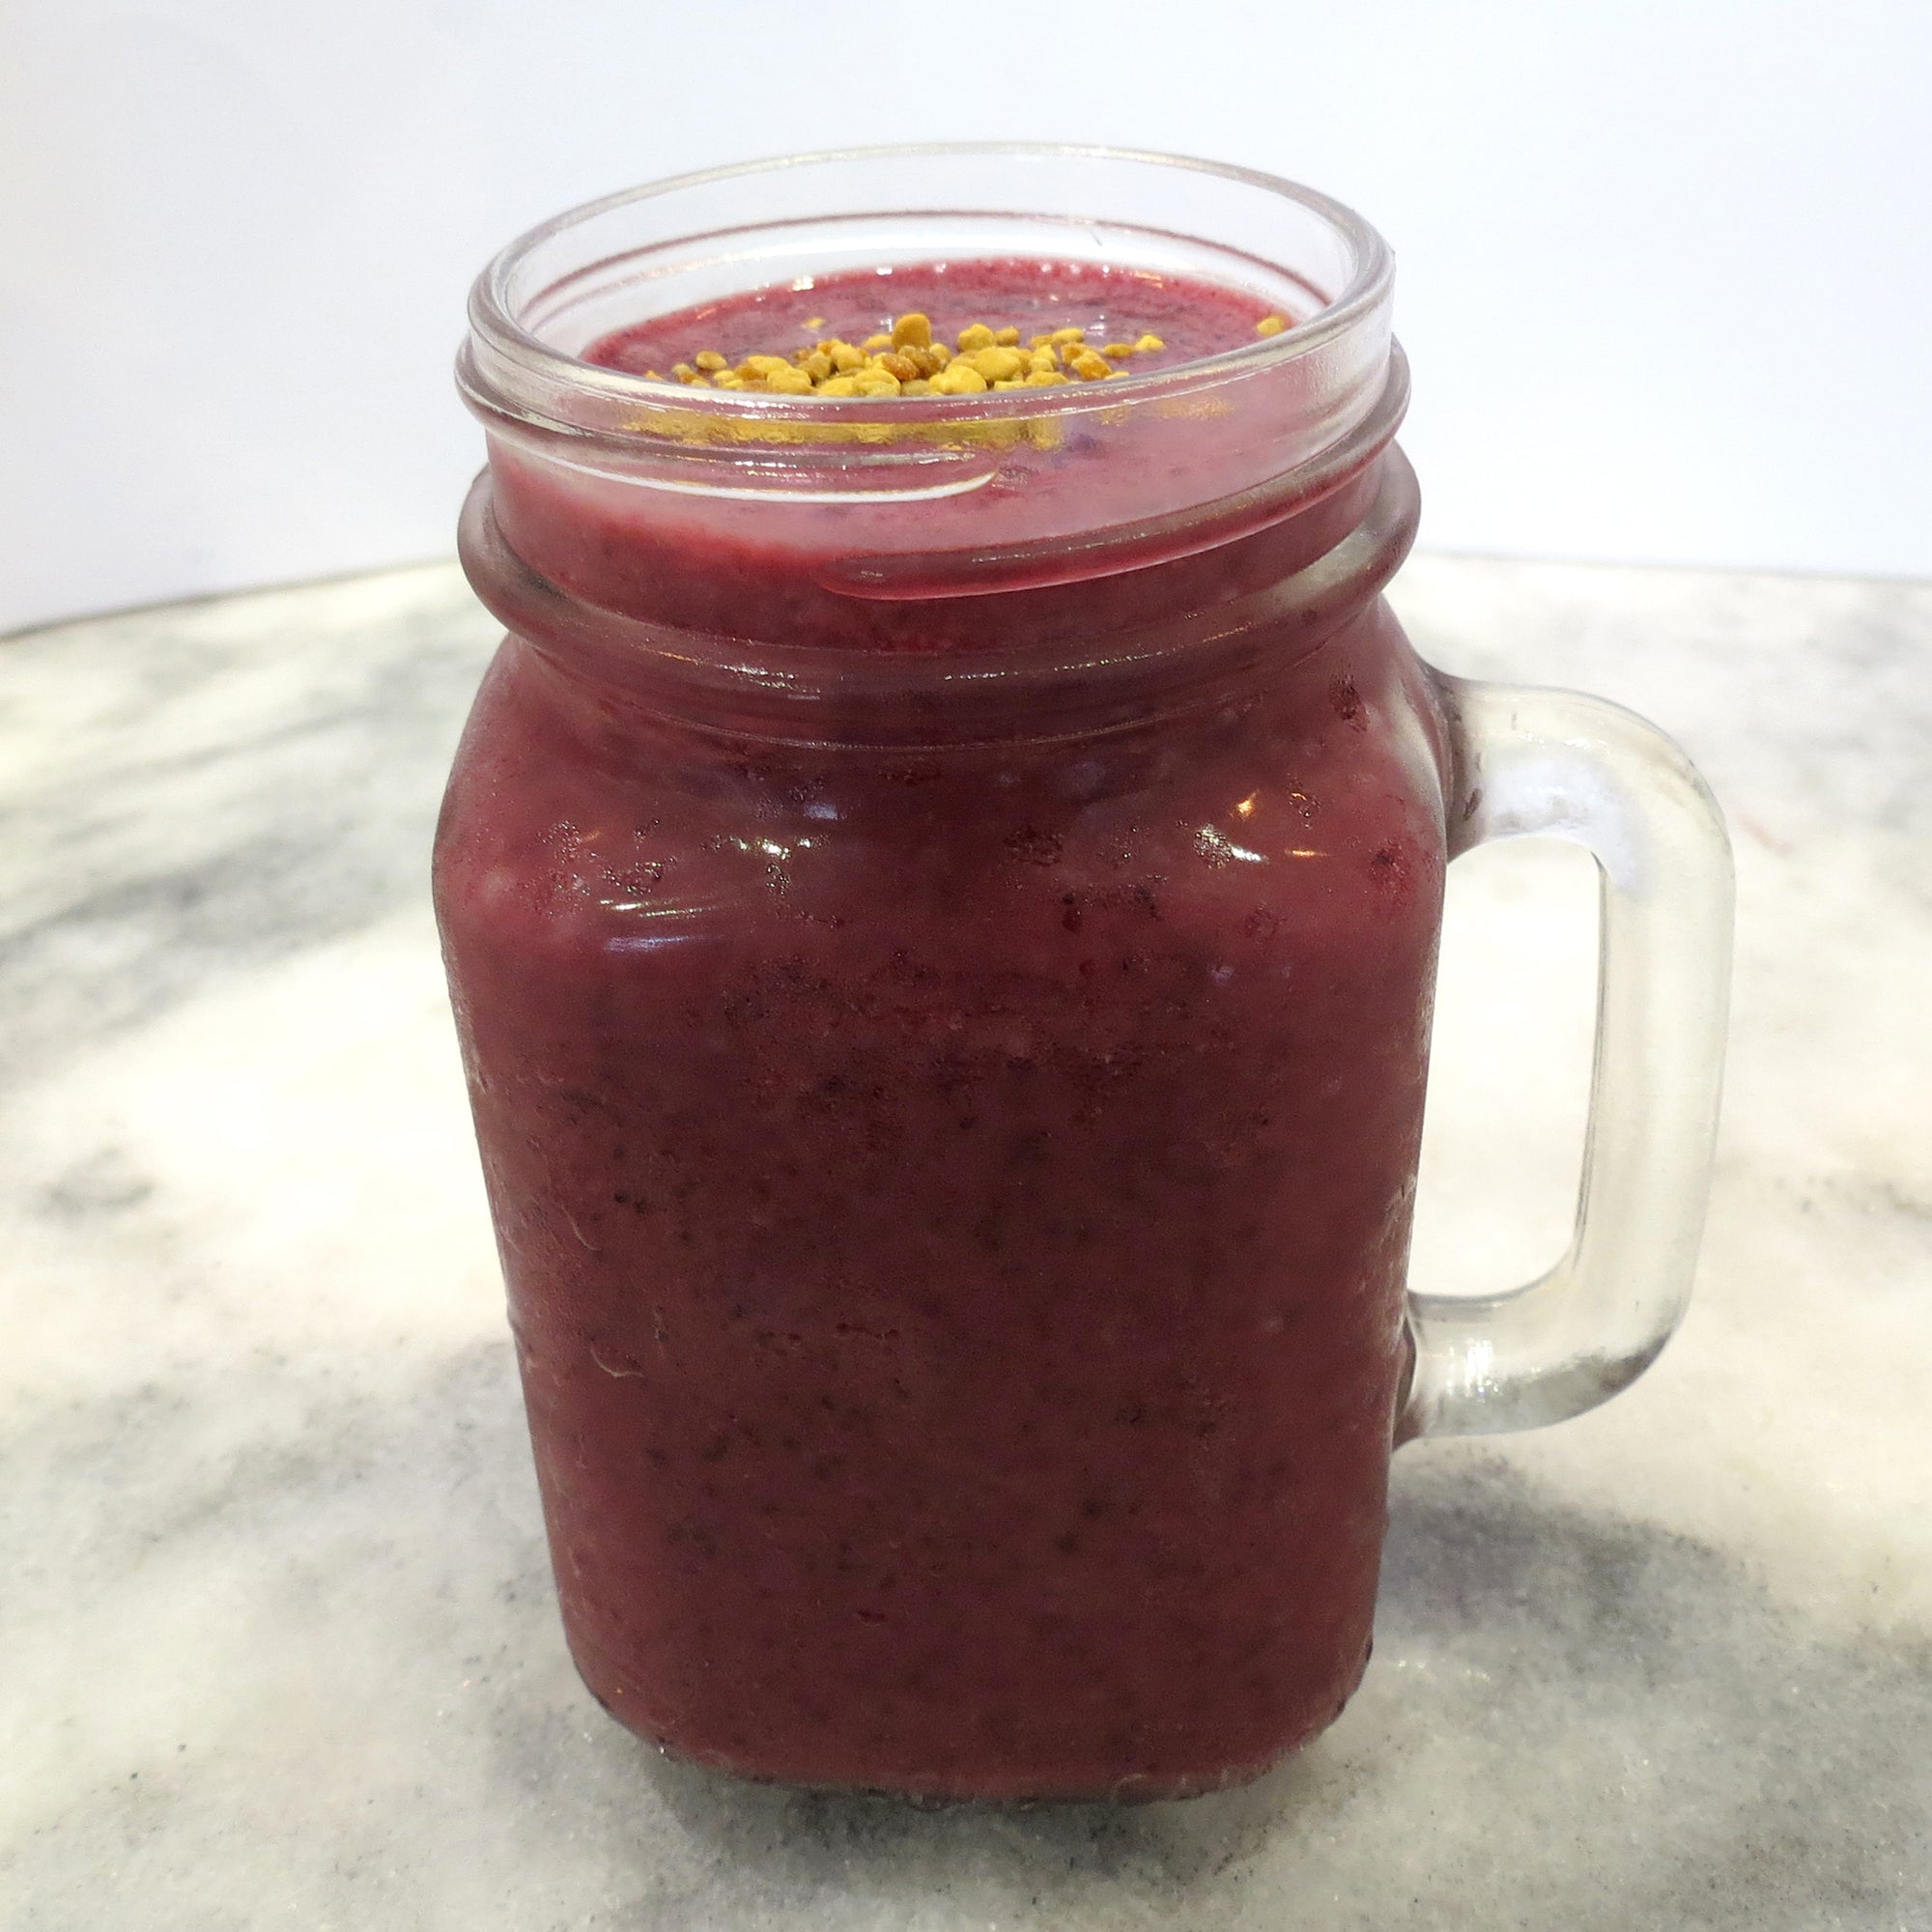 SpaJuiceBar's Cupu Acai smoothie is made with cupuacu, organic acai, wild blueberry, banana, organic apple juice served 16oz Topped with bee pollen